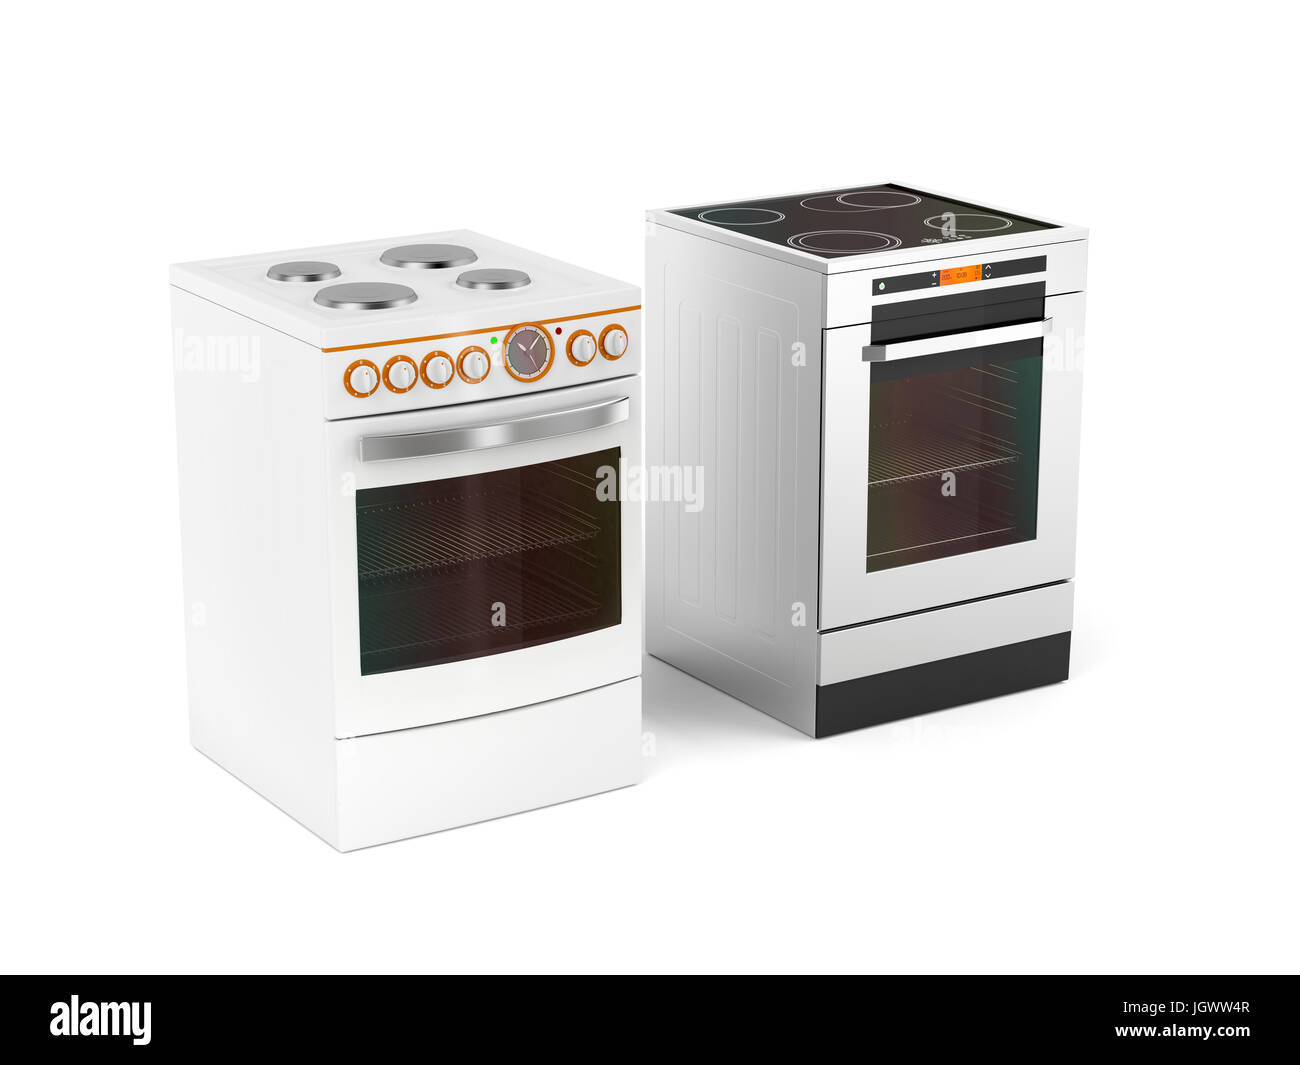 Two different types of electric stoves on white background Stock Photo